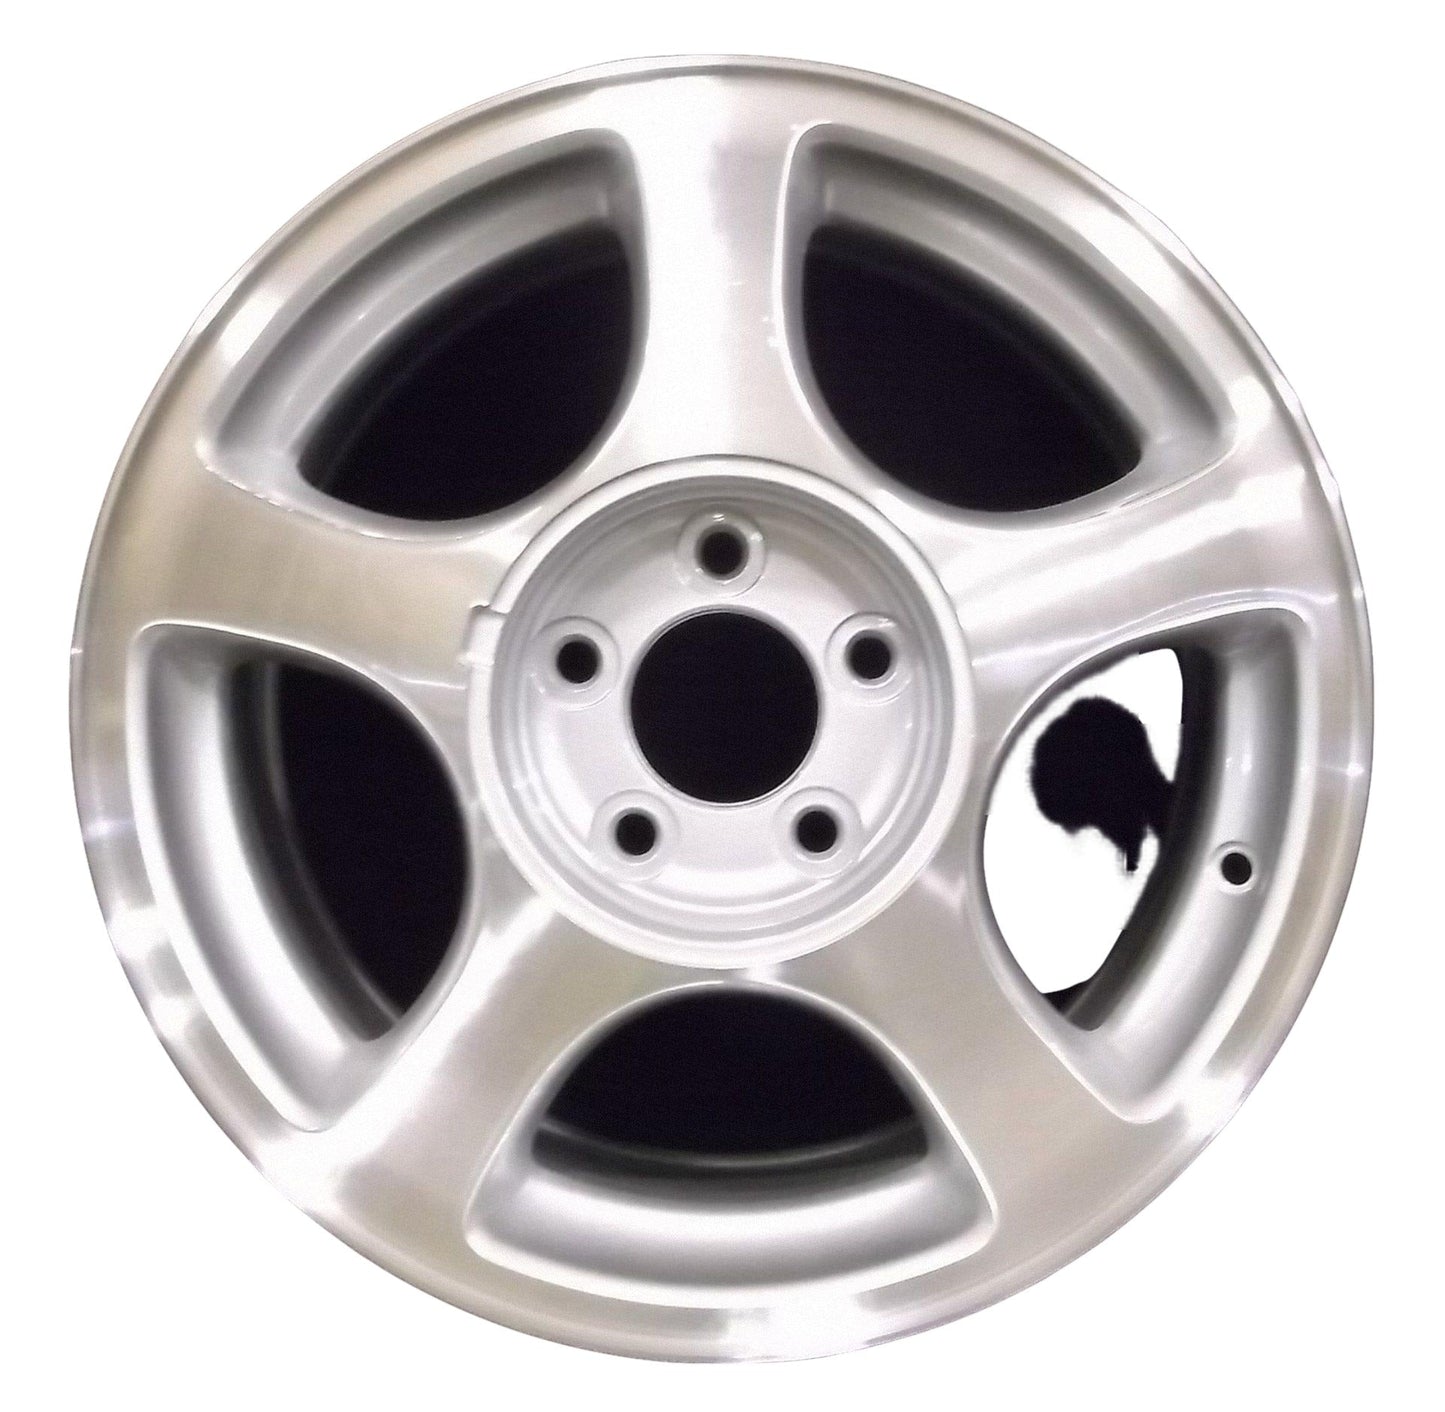 Ford Mustang  2001, 2002, 2003, 2004 Factory OEM Car Wheel Size 16x7.5 Alloy WAO.3474A.PS02.MA